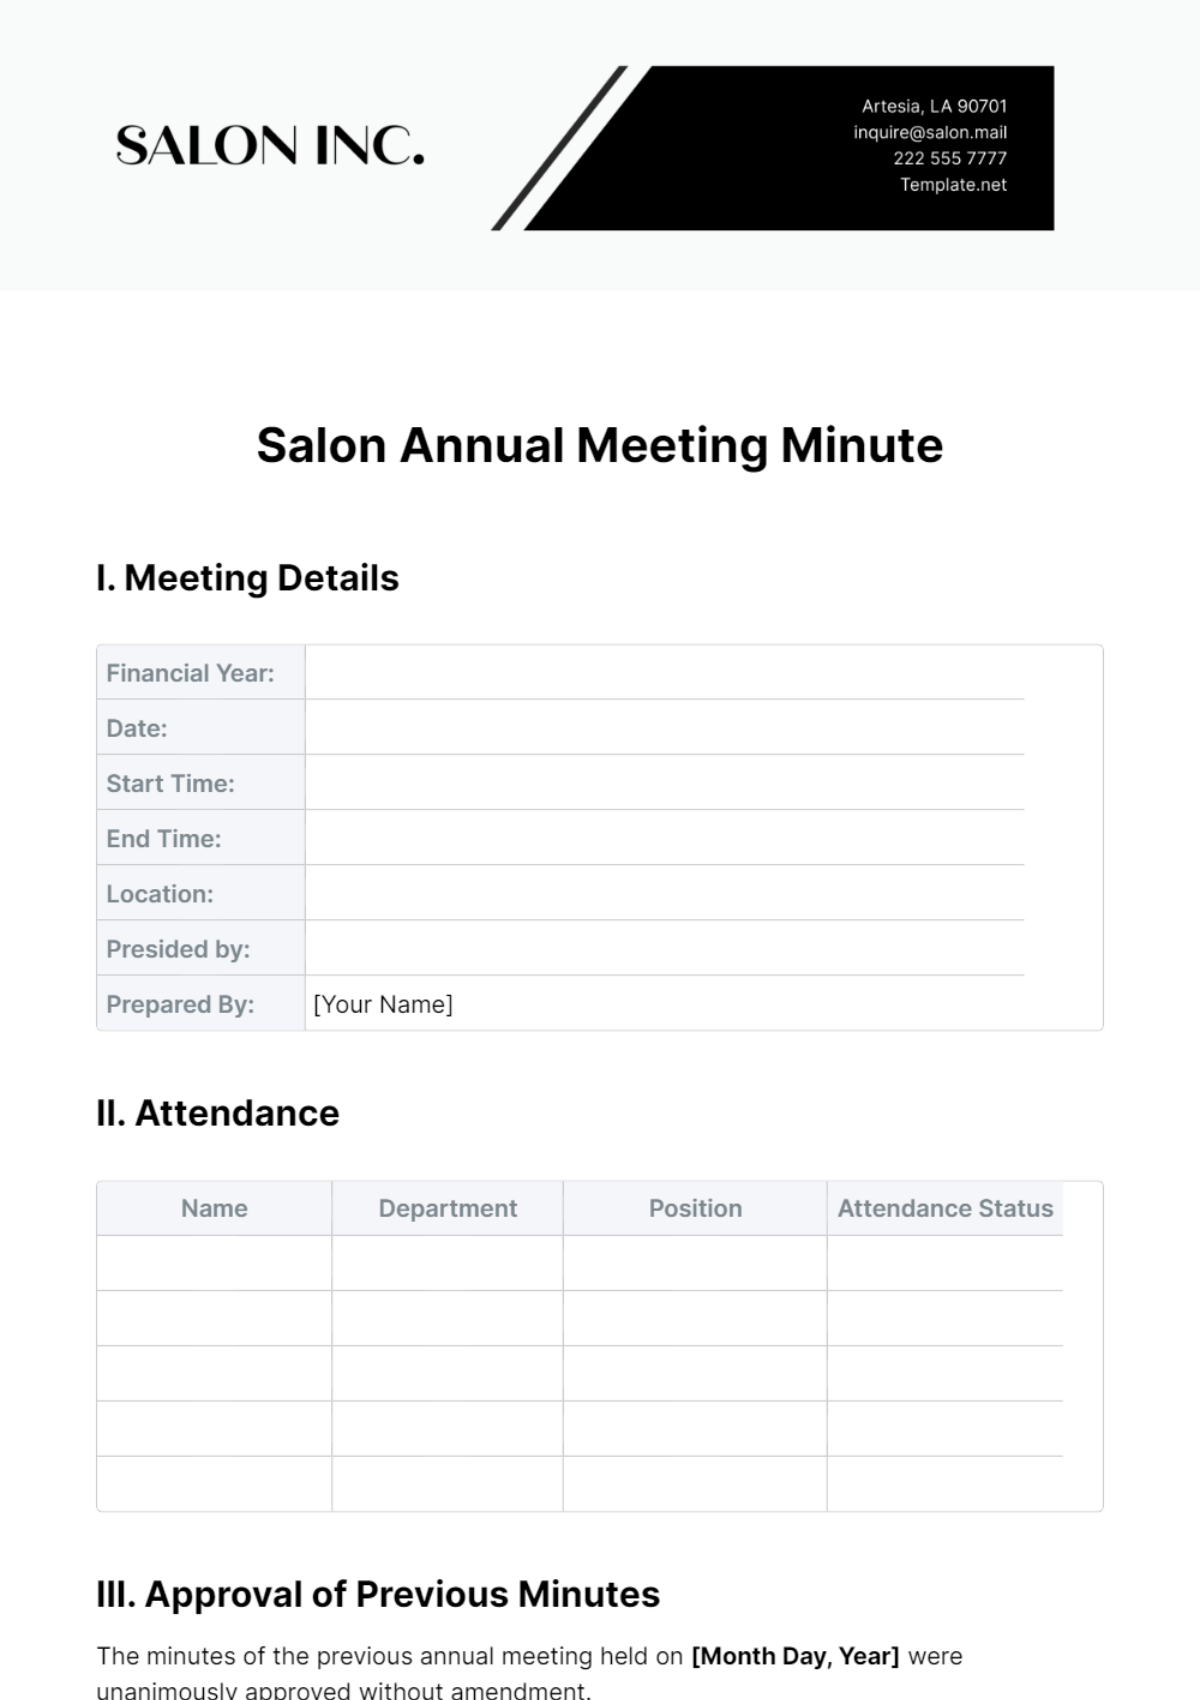 Free Salon Annual Meeting Minute Template